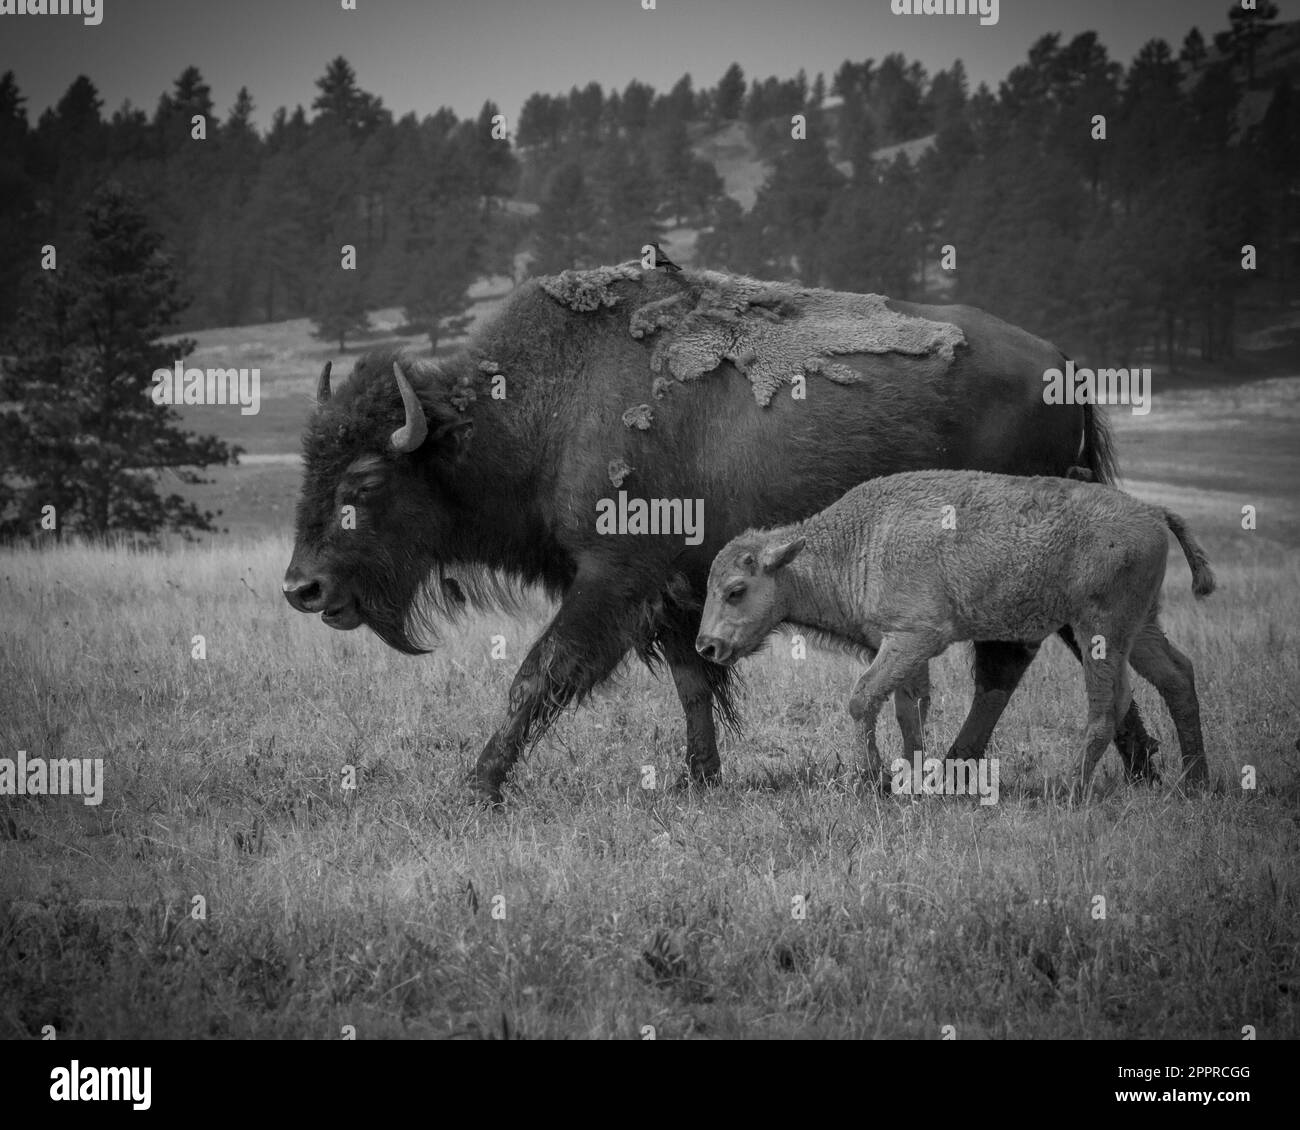 Baby bison Black and White Stock Photos & Images - Alamy